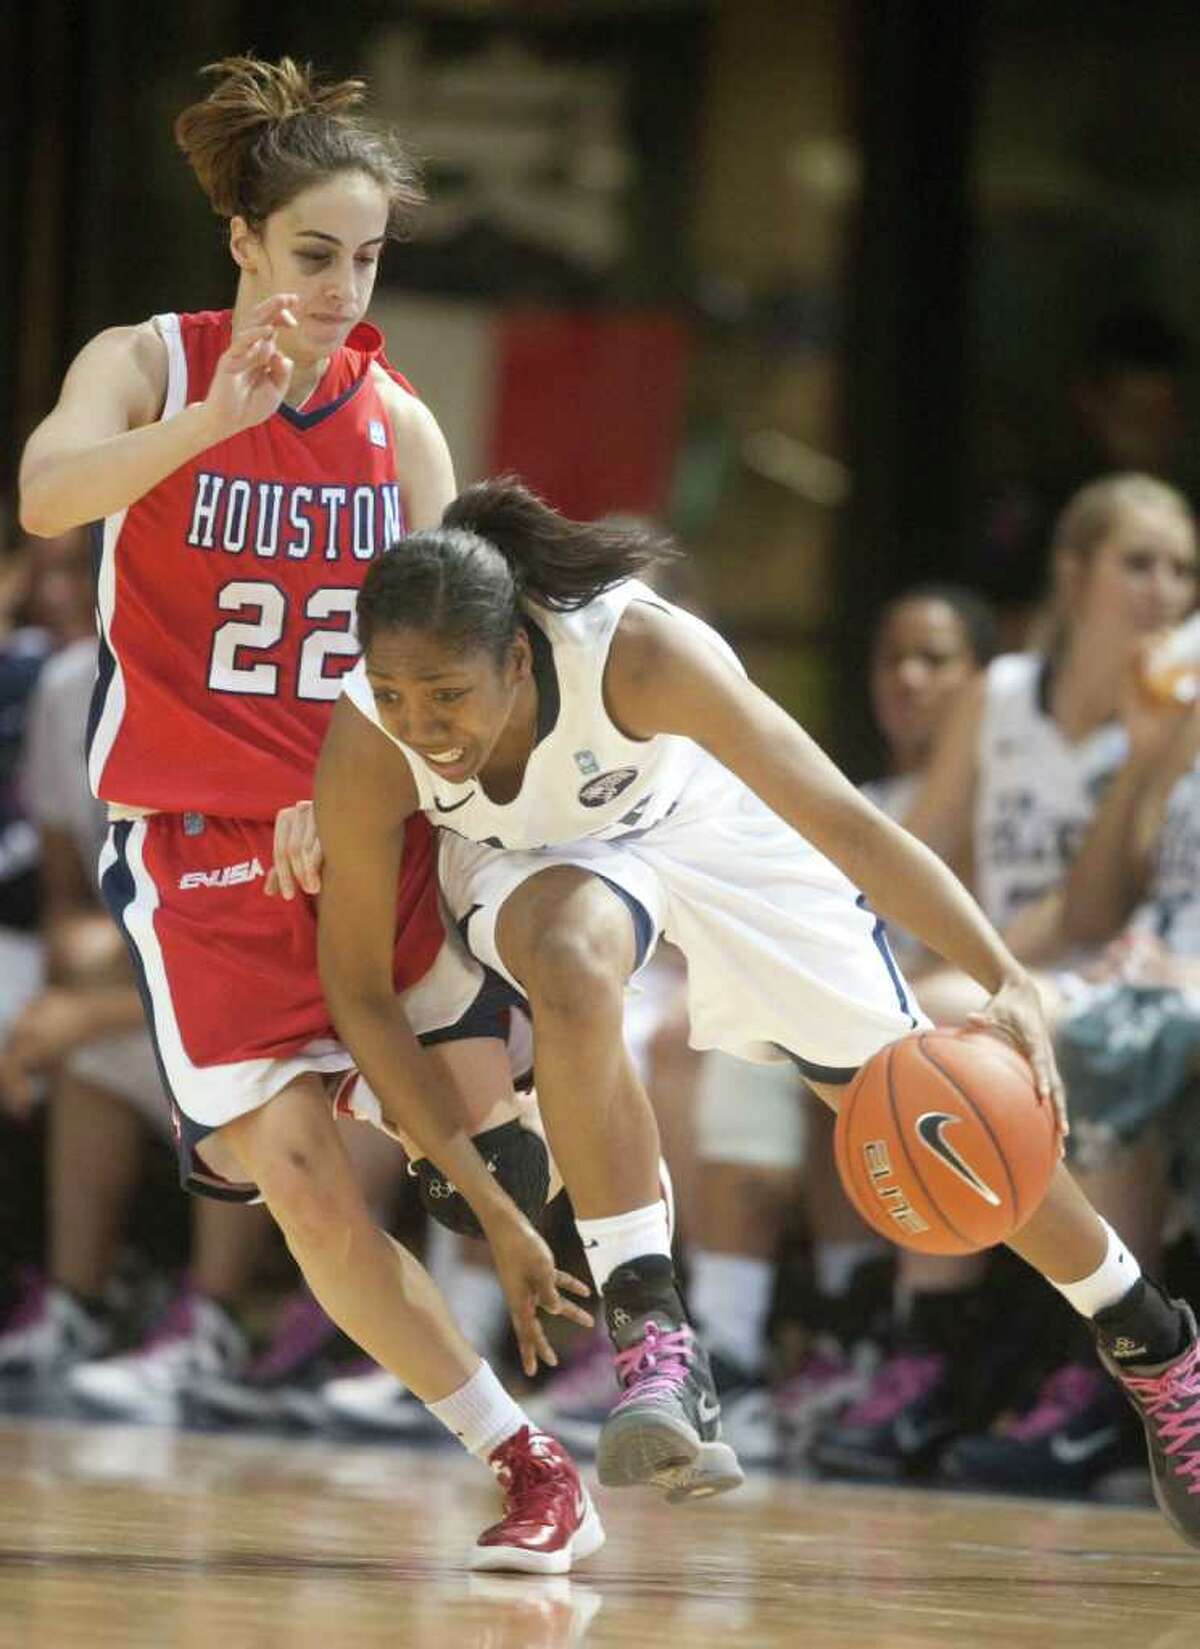 Rice guard Maya Adetula (22) drives against University of Houston guard Roxana Button (22) during the second half of a NCAA college basketball game at Tudor Field House on Thursday, February 23, 2012 in Houston, TX. The Owls defeated the Cougars 68-40.